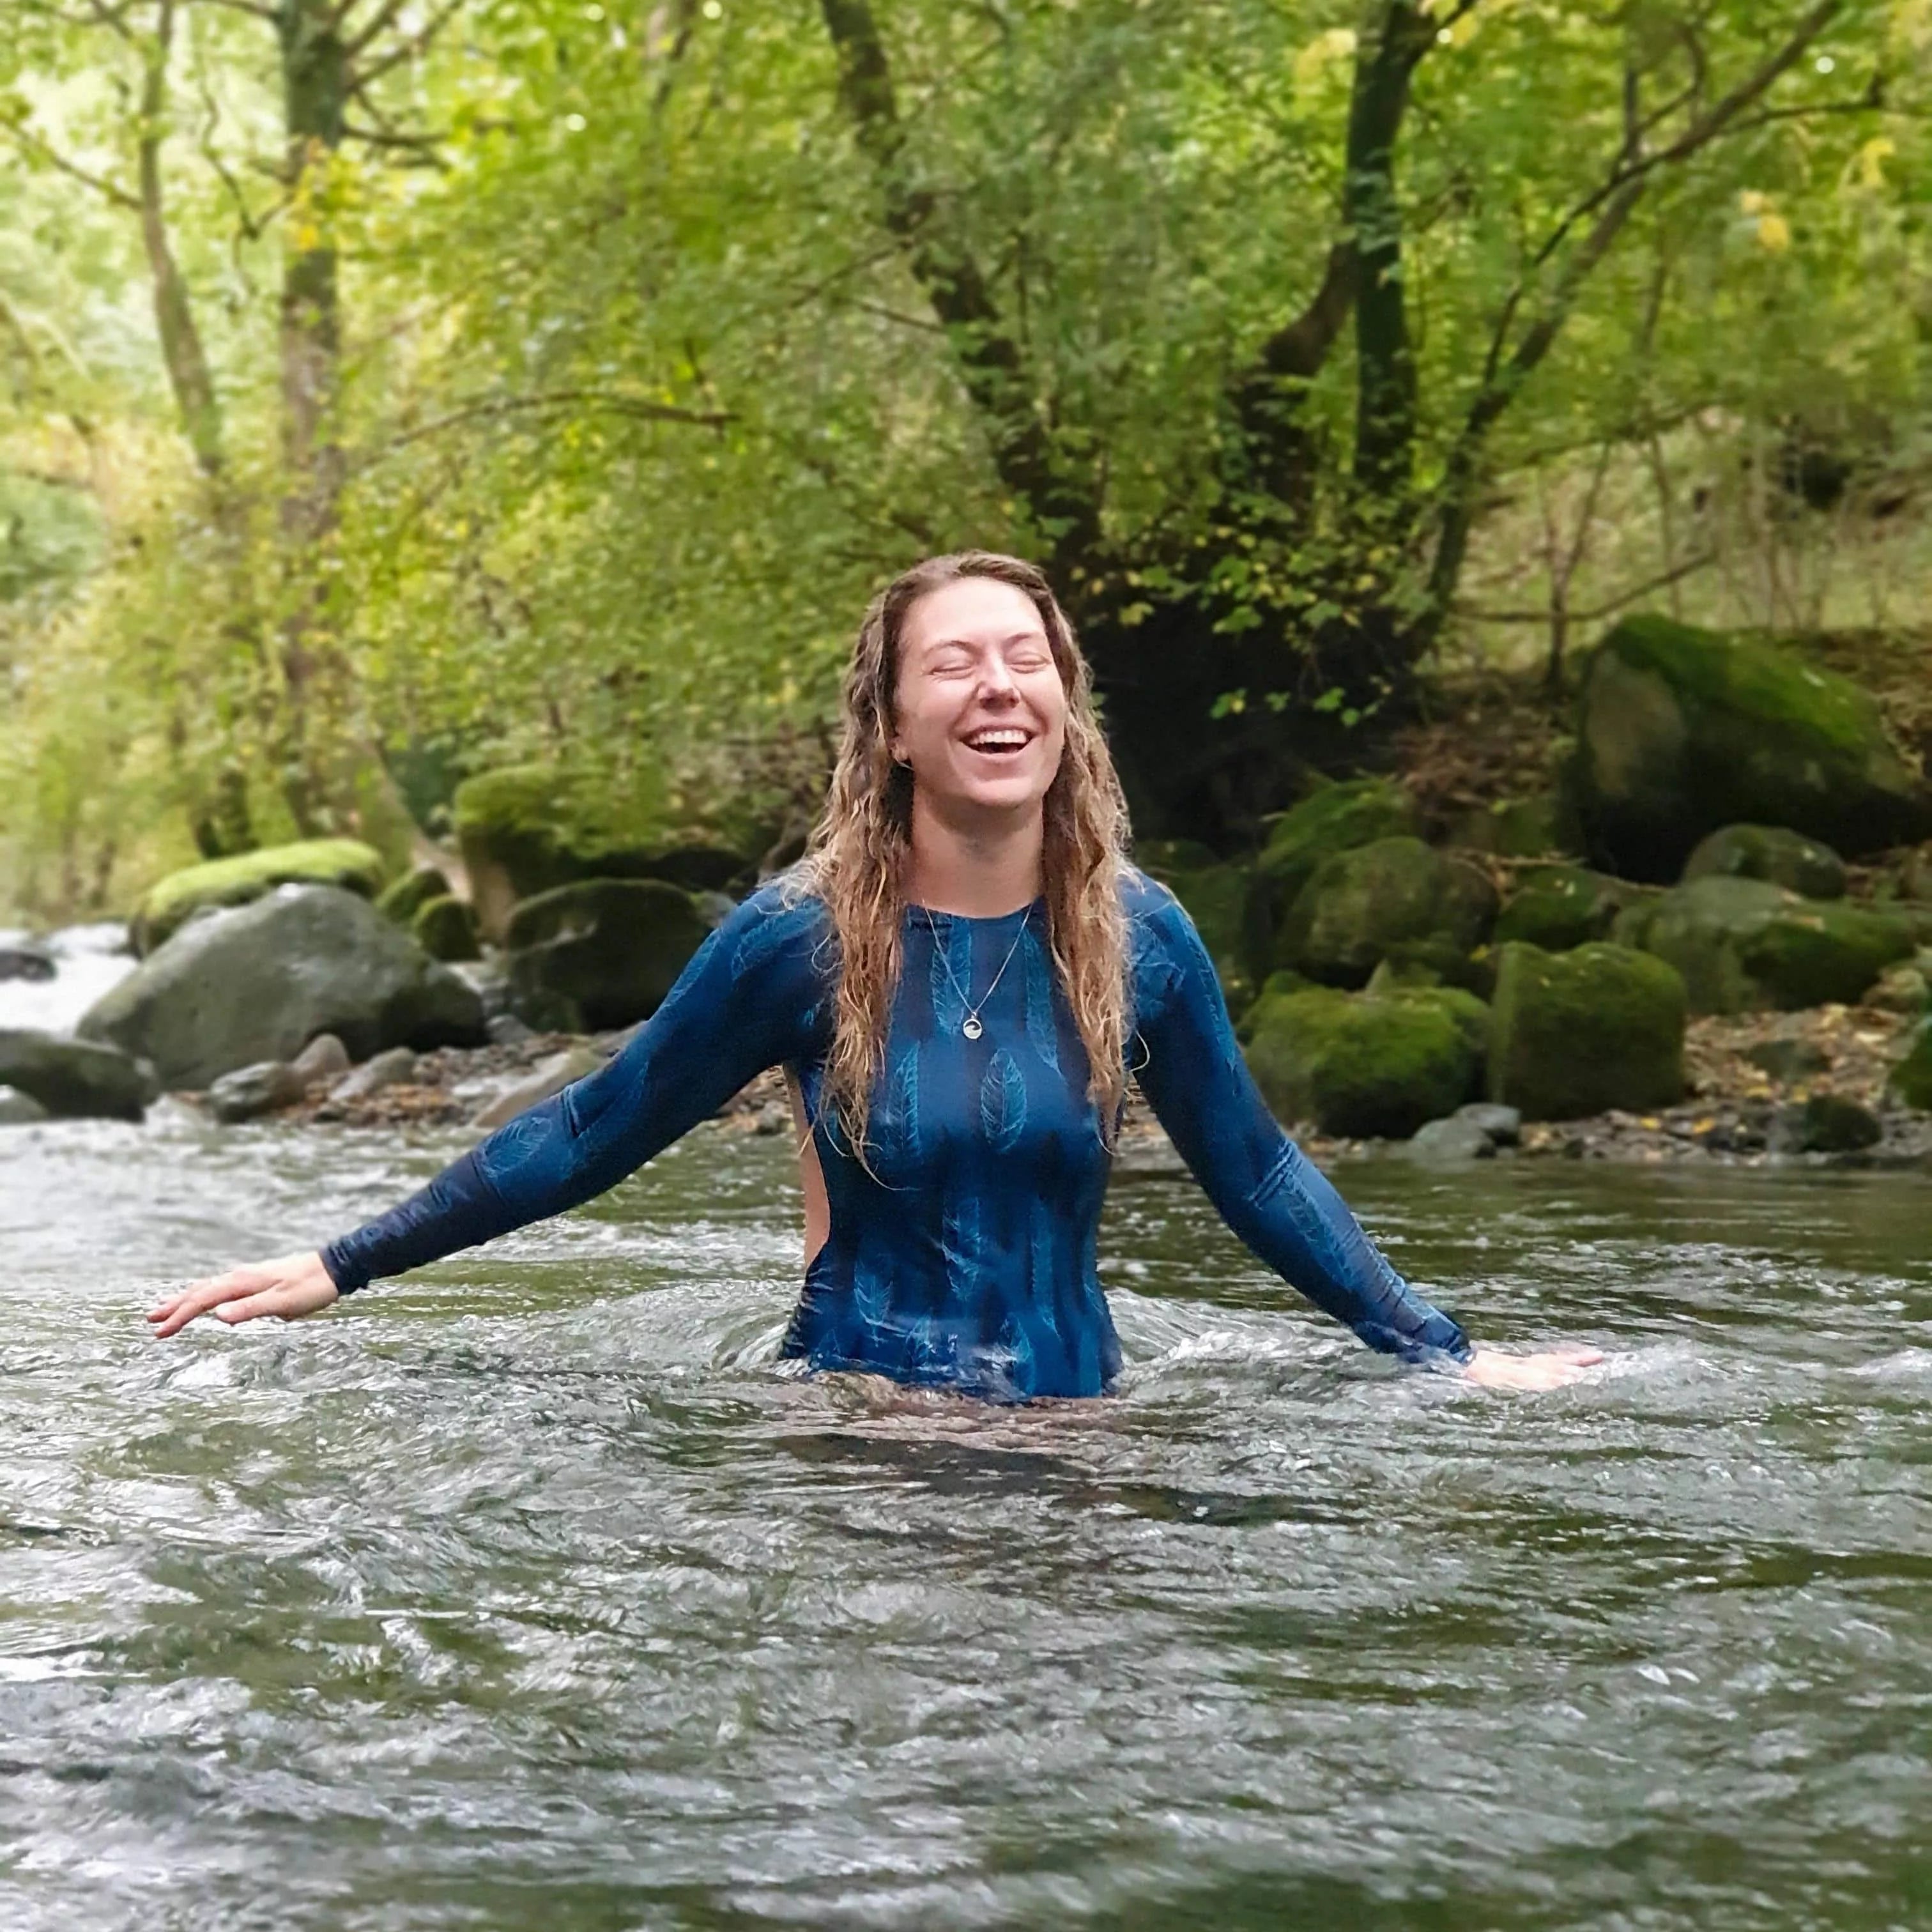 Lisa Outdoors takes on the dip a day challenge.